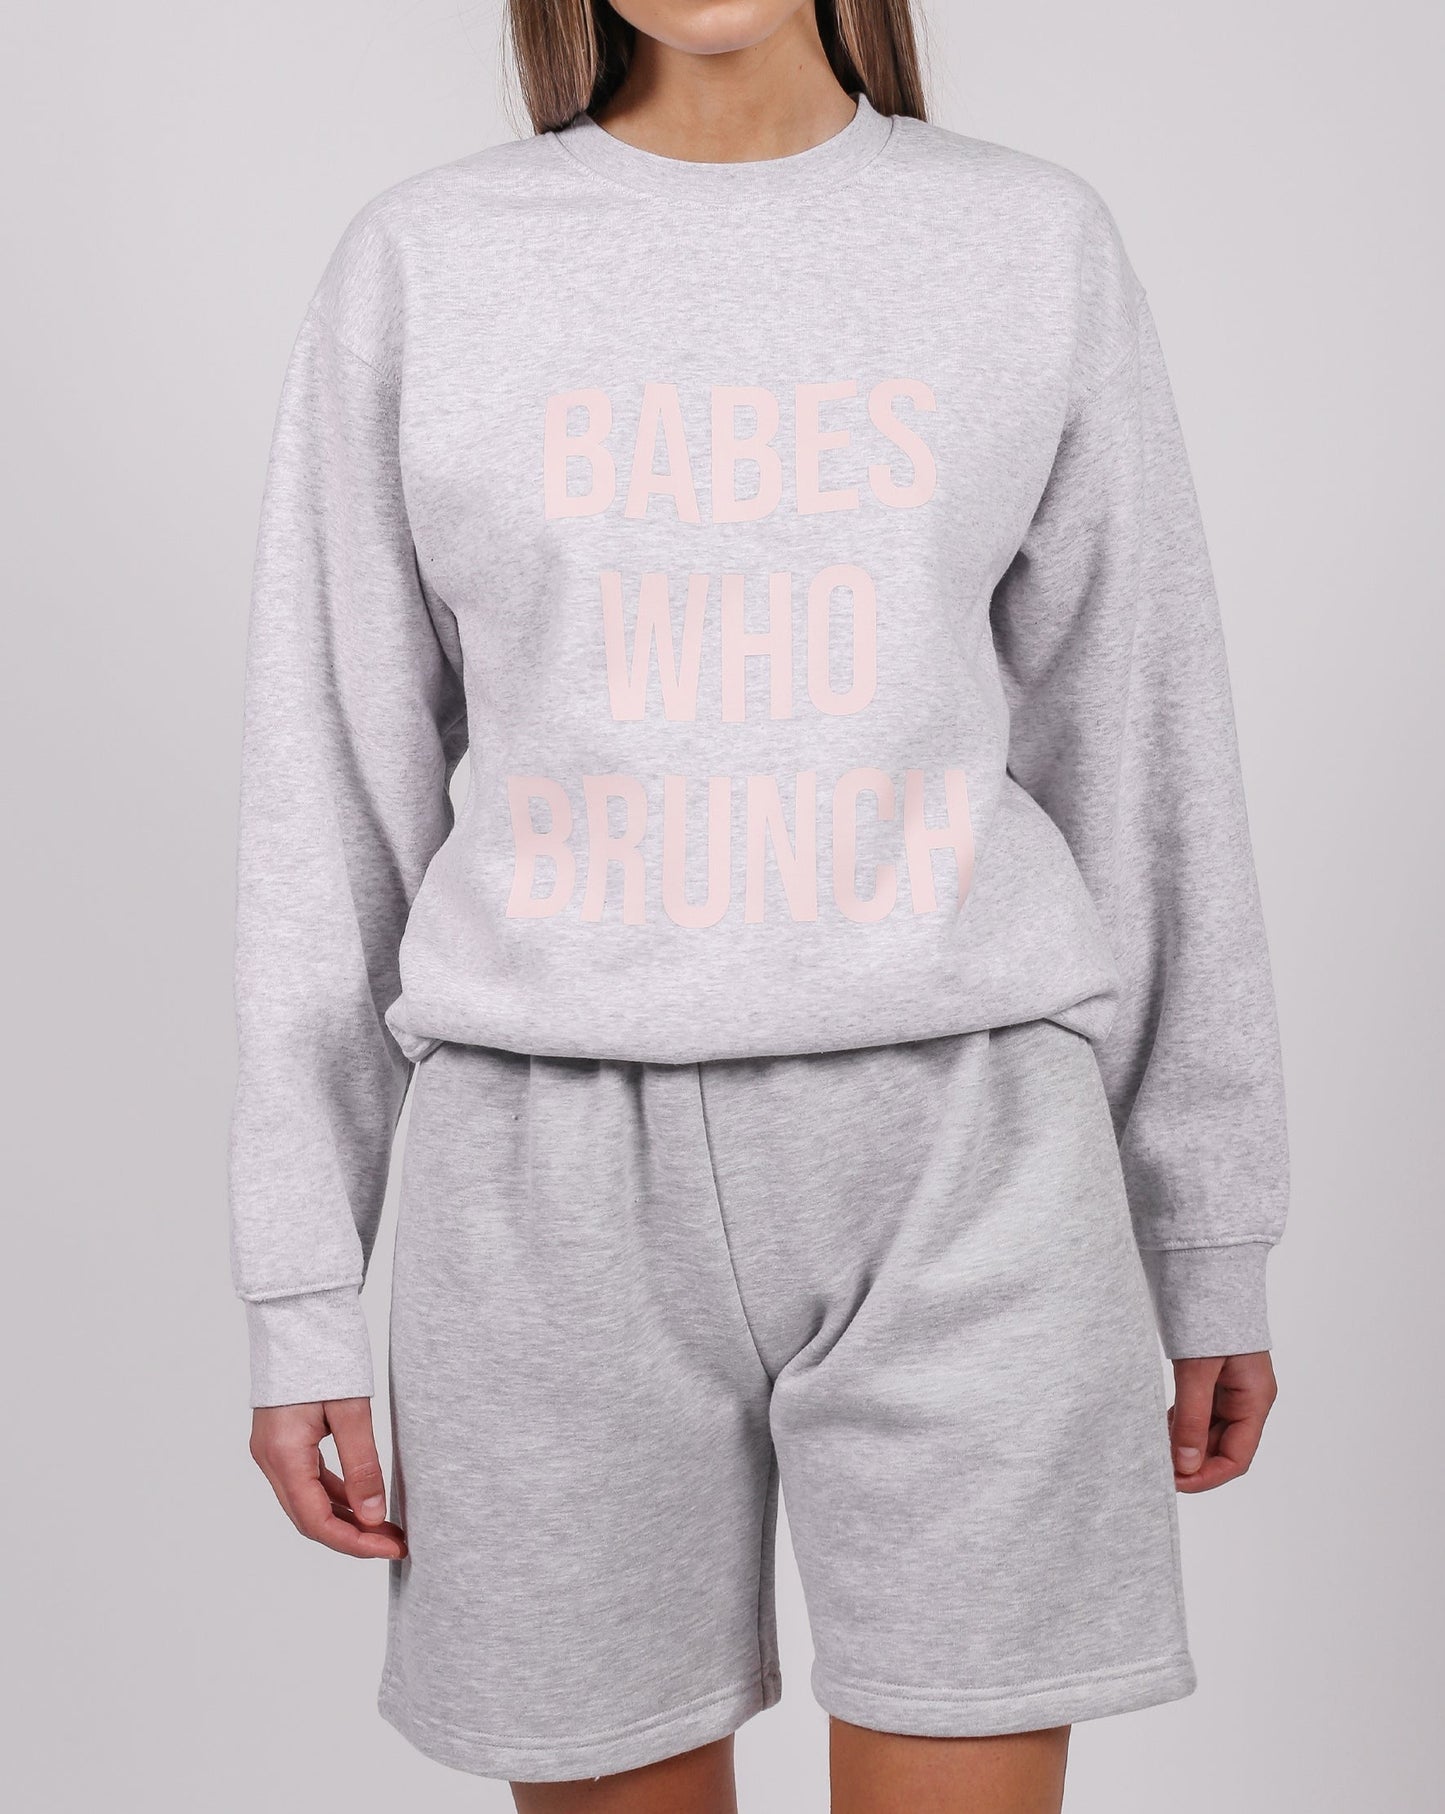 Babes Who Brunch Sweater